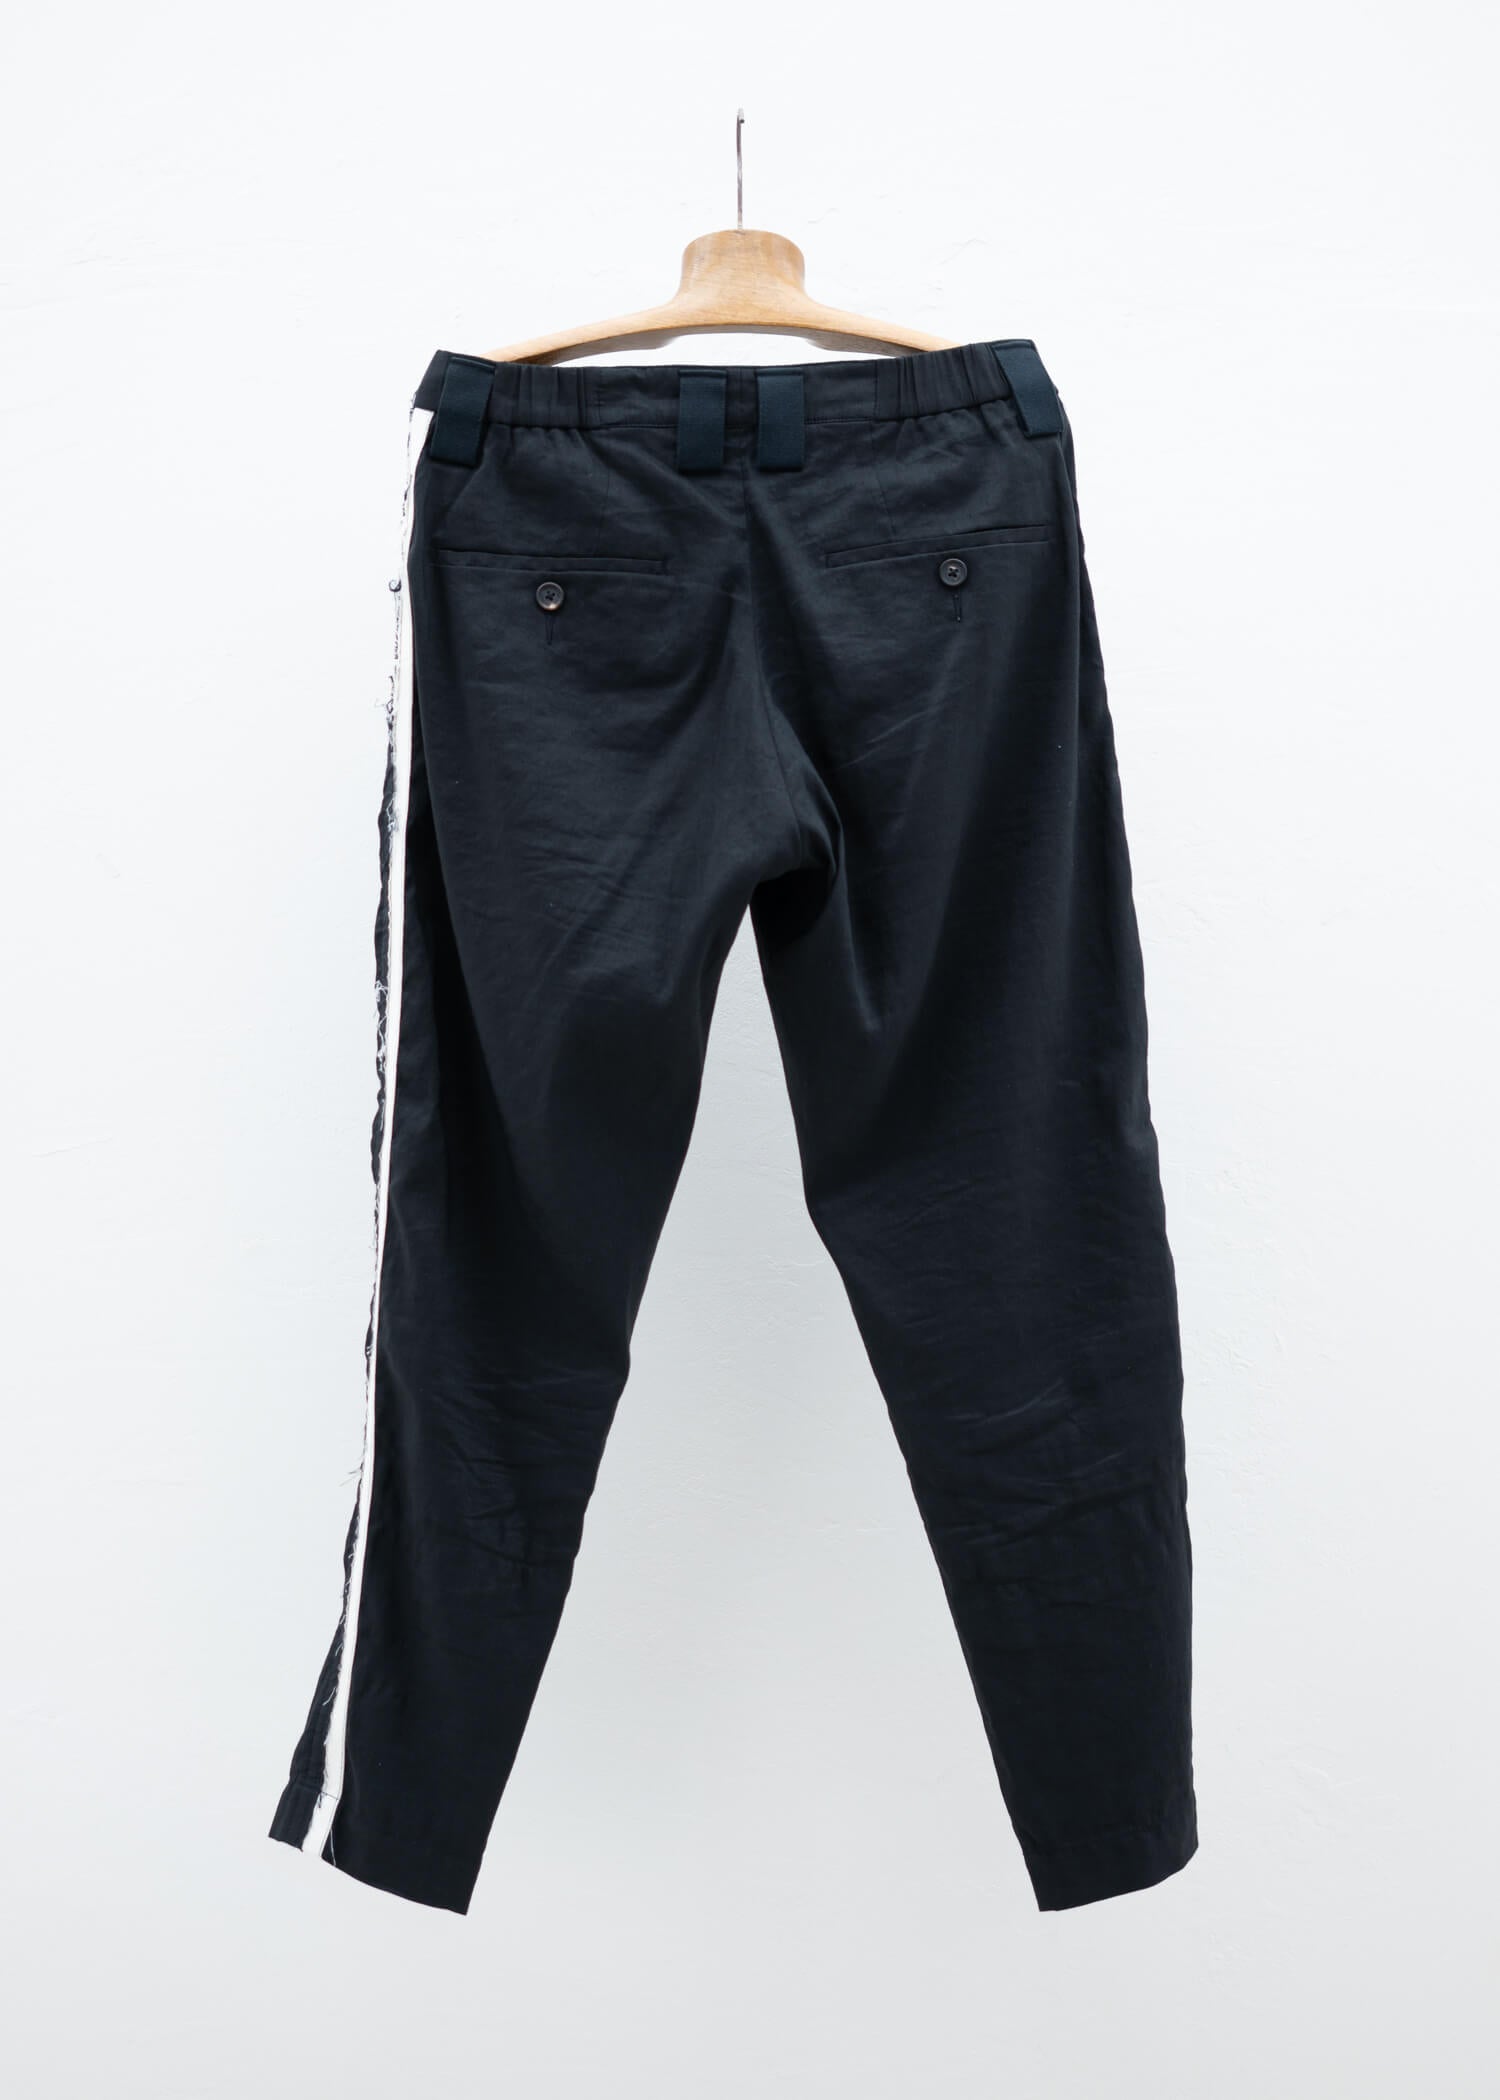 ZIGGY CHEN 2019SS Side-Line Cropped Pants